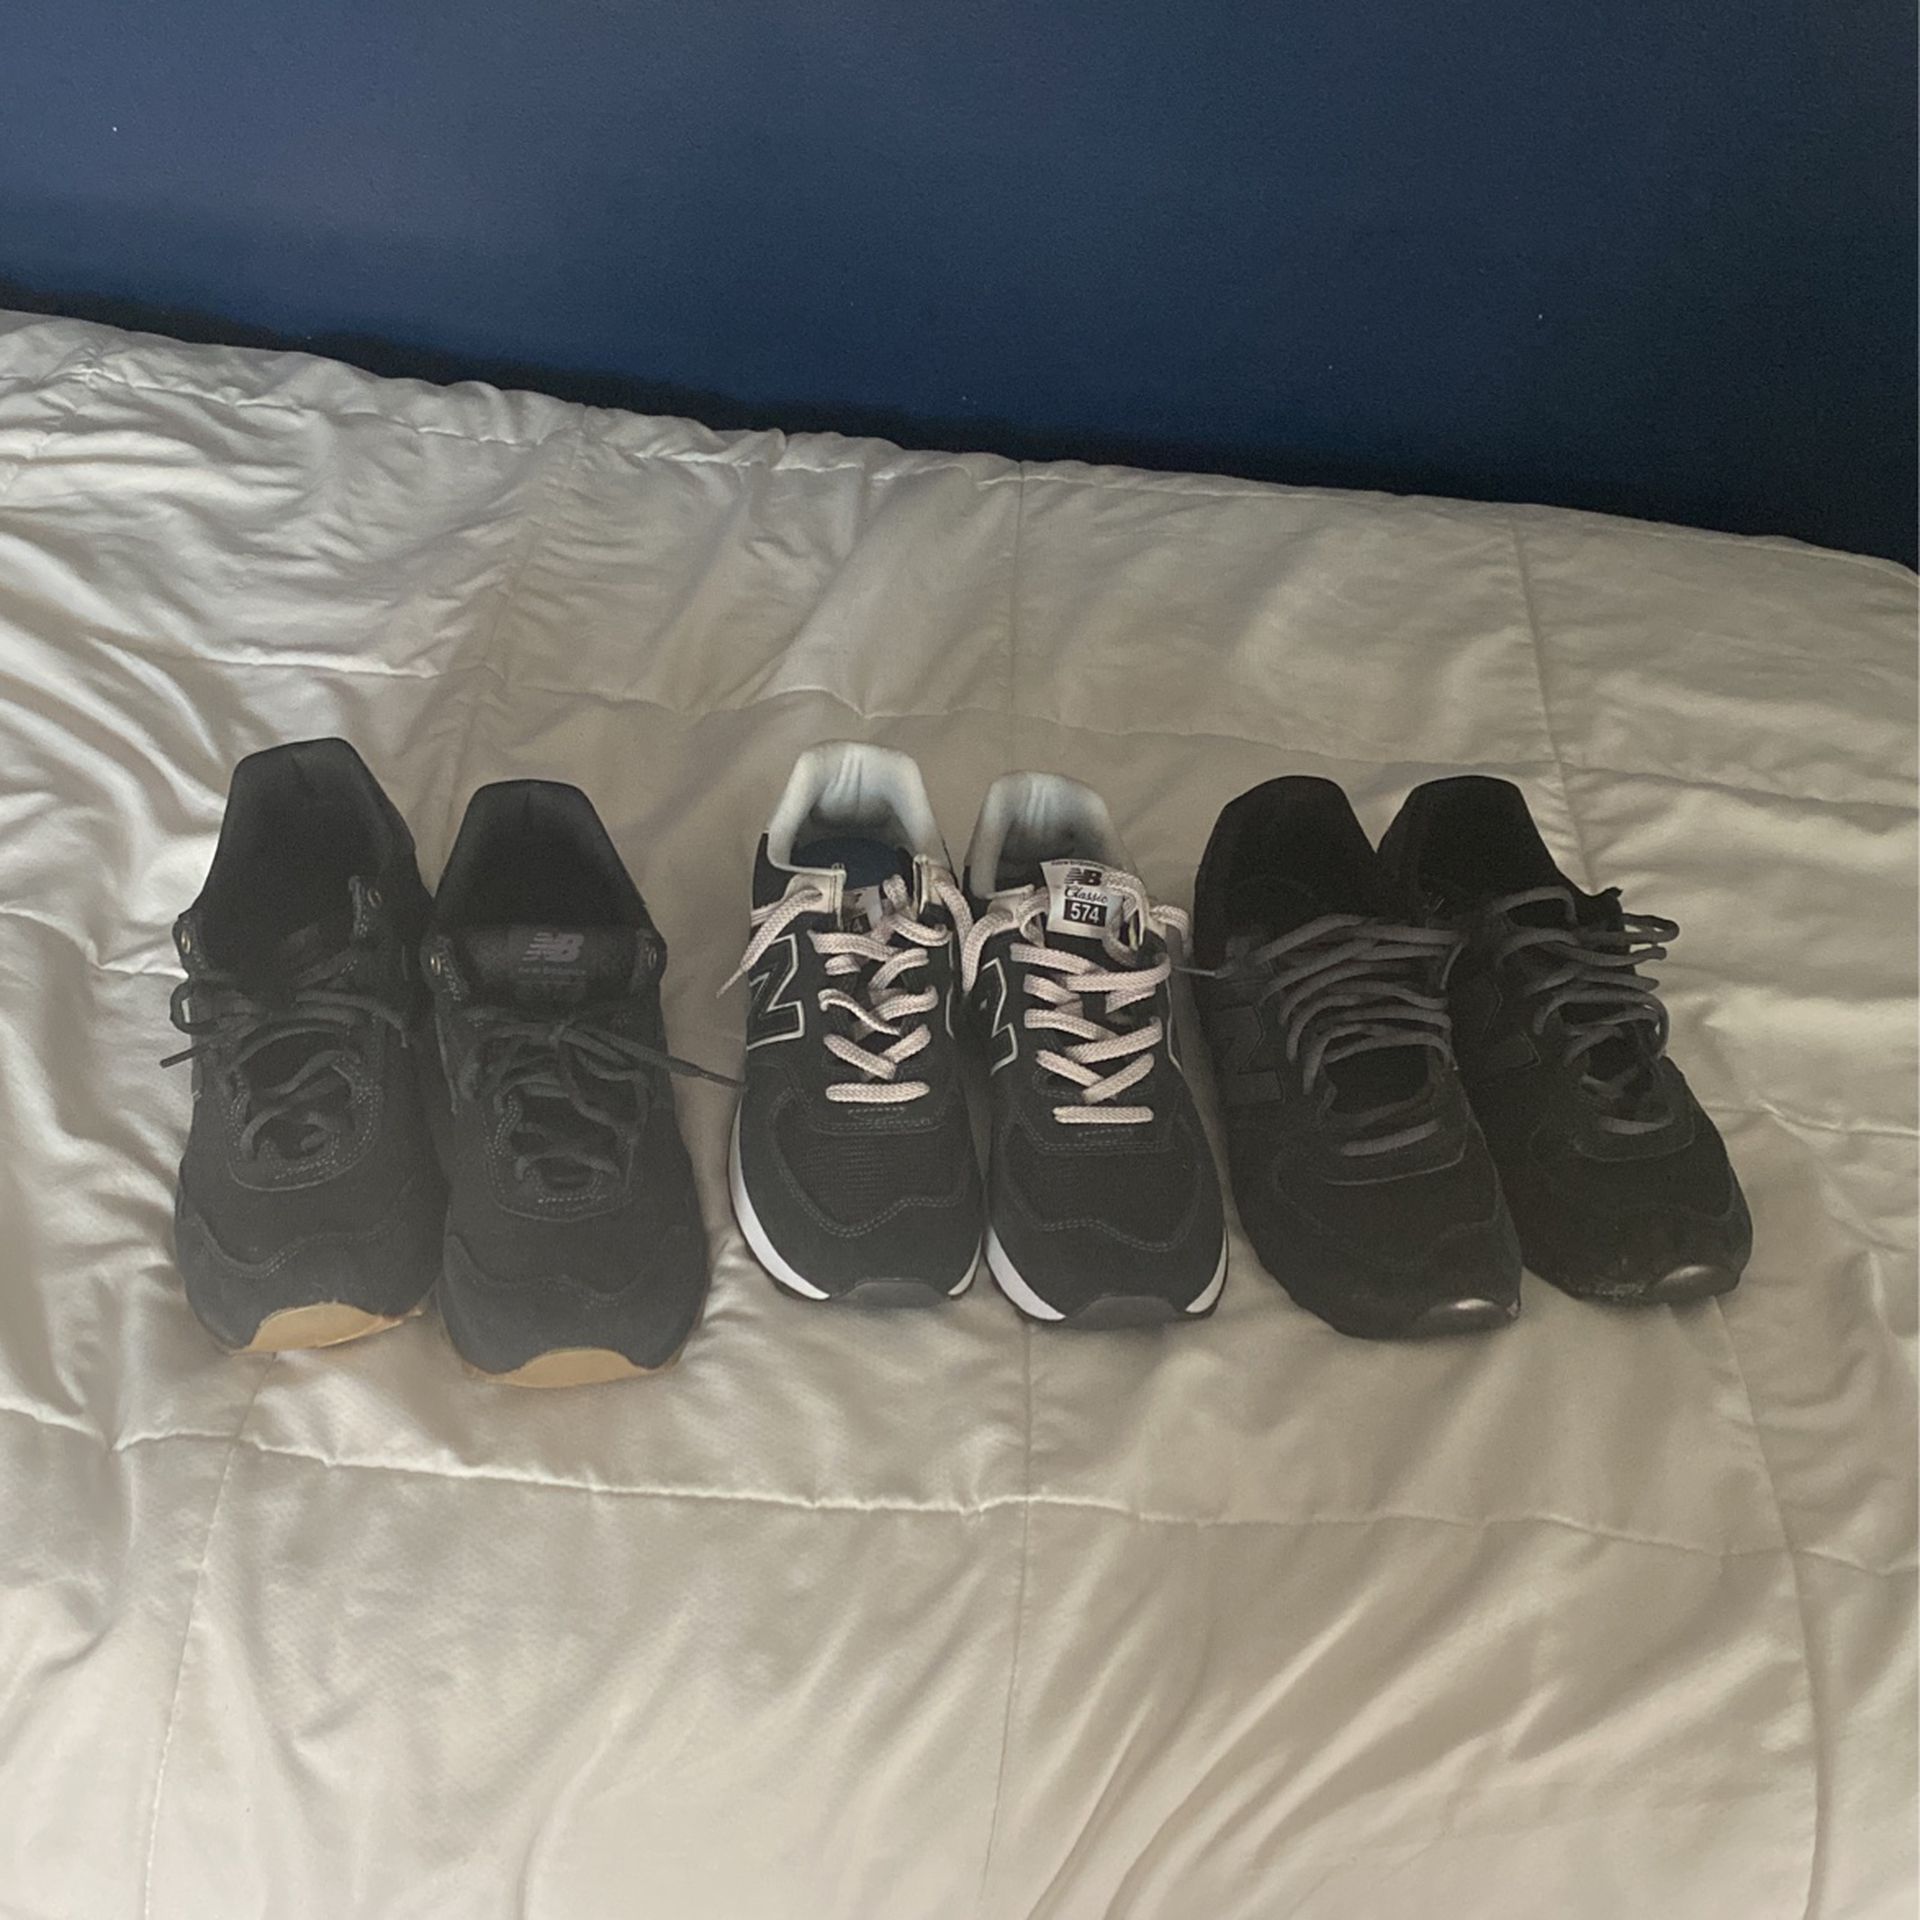 New Balance Shoes For Sale !